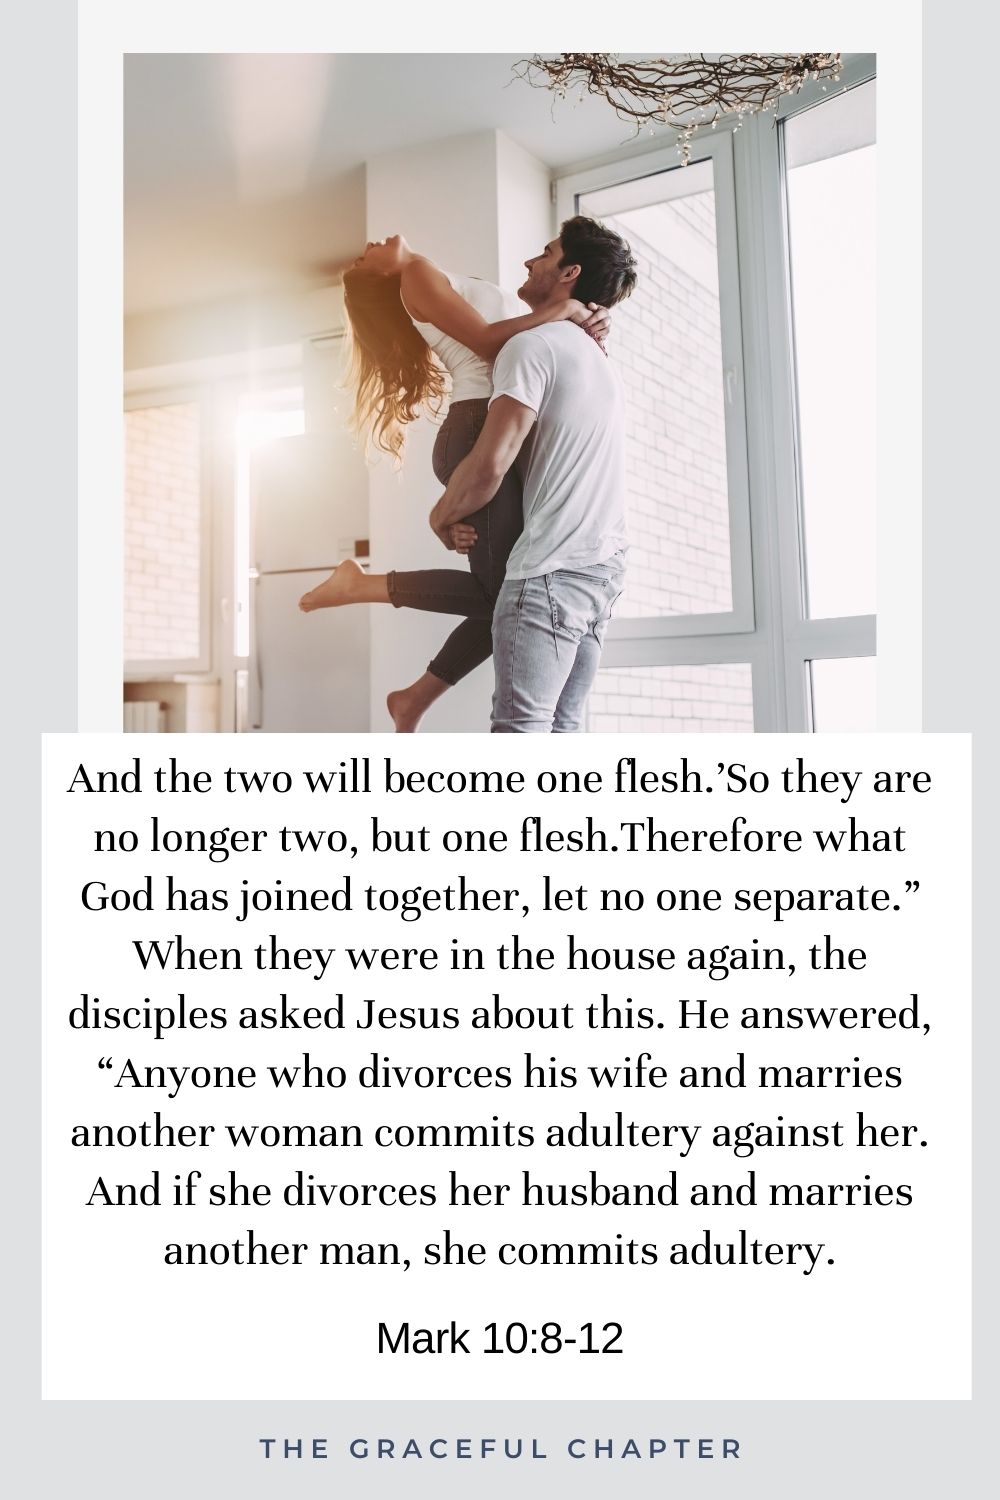 And the two will become one flesh.’So they are no longer two, but one flesh.Therefore what God has joined together, let no one separate.” When they were in the house again, the disciples asked Jesus about this. He answered, “Anyone who divorces his wife and marries another woman commits adultery against her. And if she divorces her husband and marries another man, she commits adultery. Mark 10:8-12